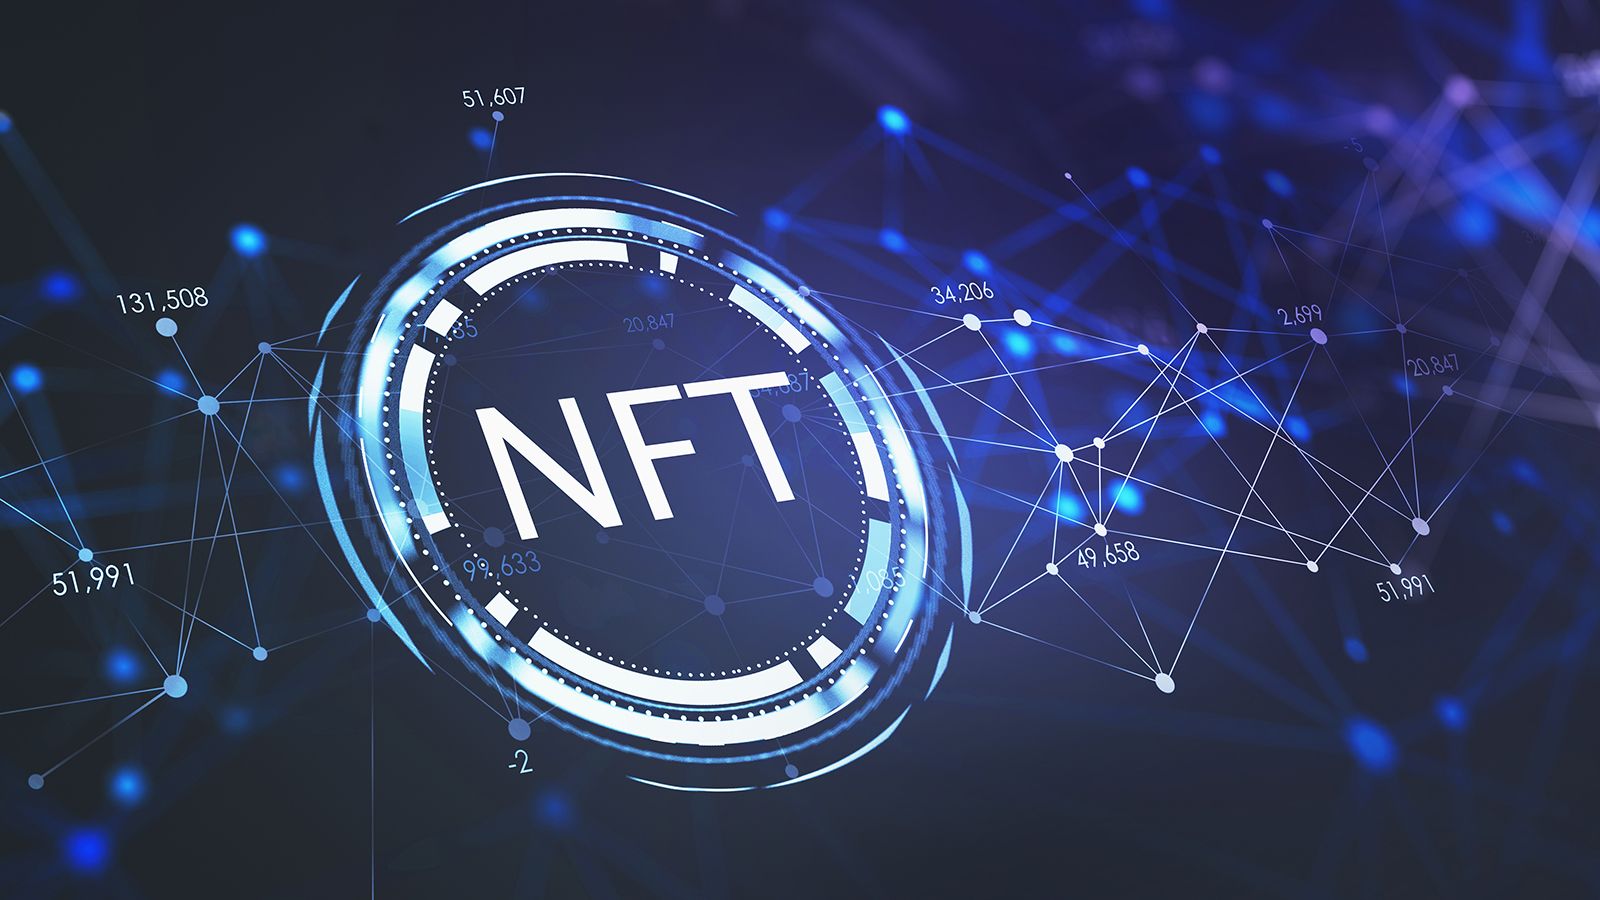 OpenSea Introduces Two New NFT Theft Protection Features